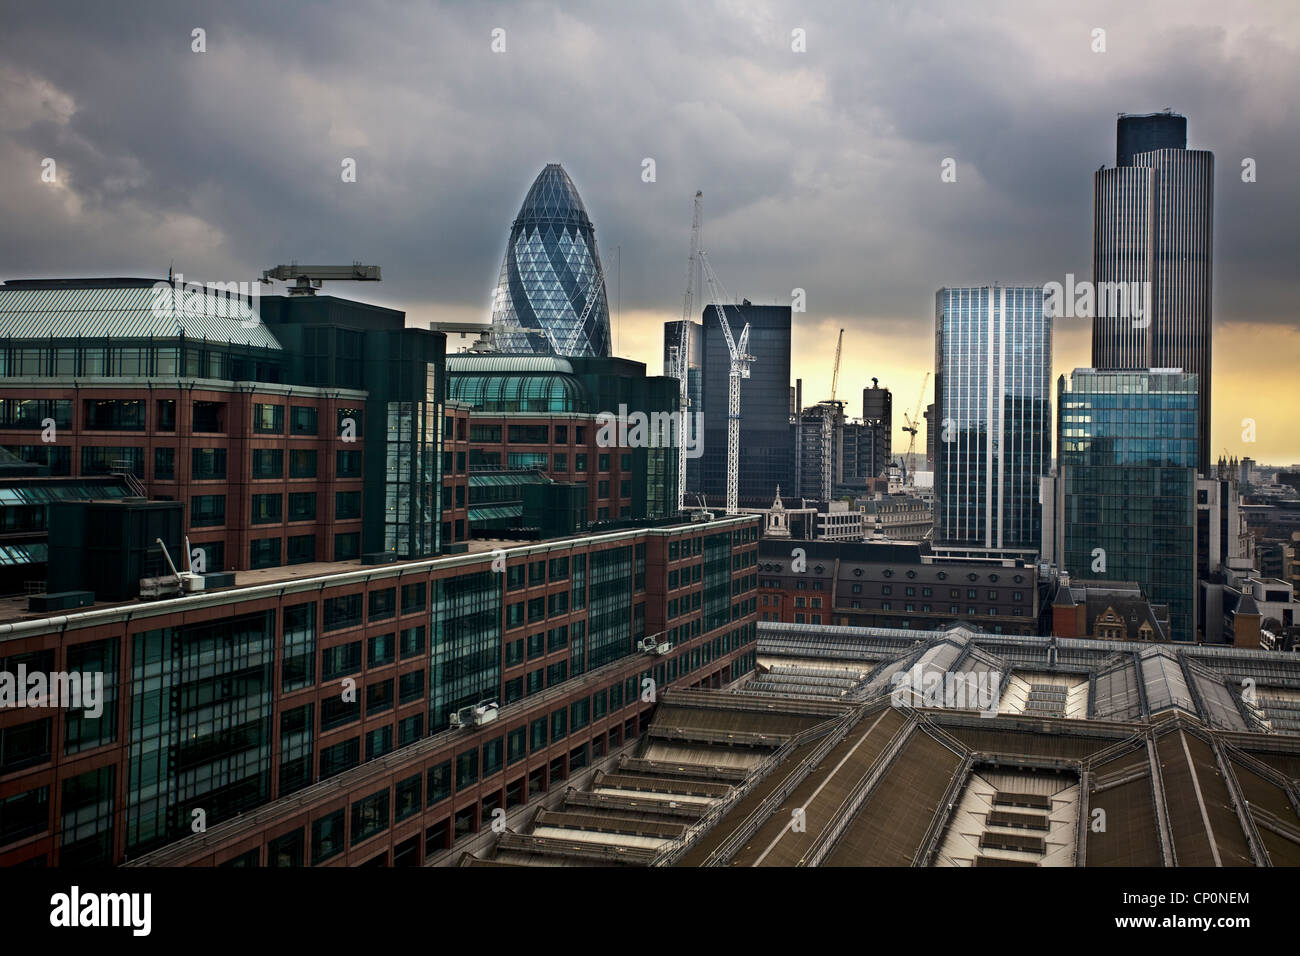 Cityscape looking across the skyline of the City of London, showing the Gherkin Building and Tower 42, London, England, UK Stock Photo